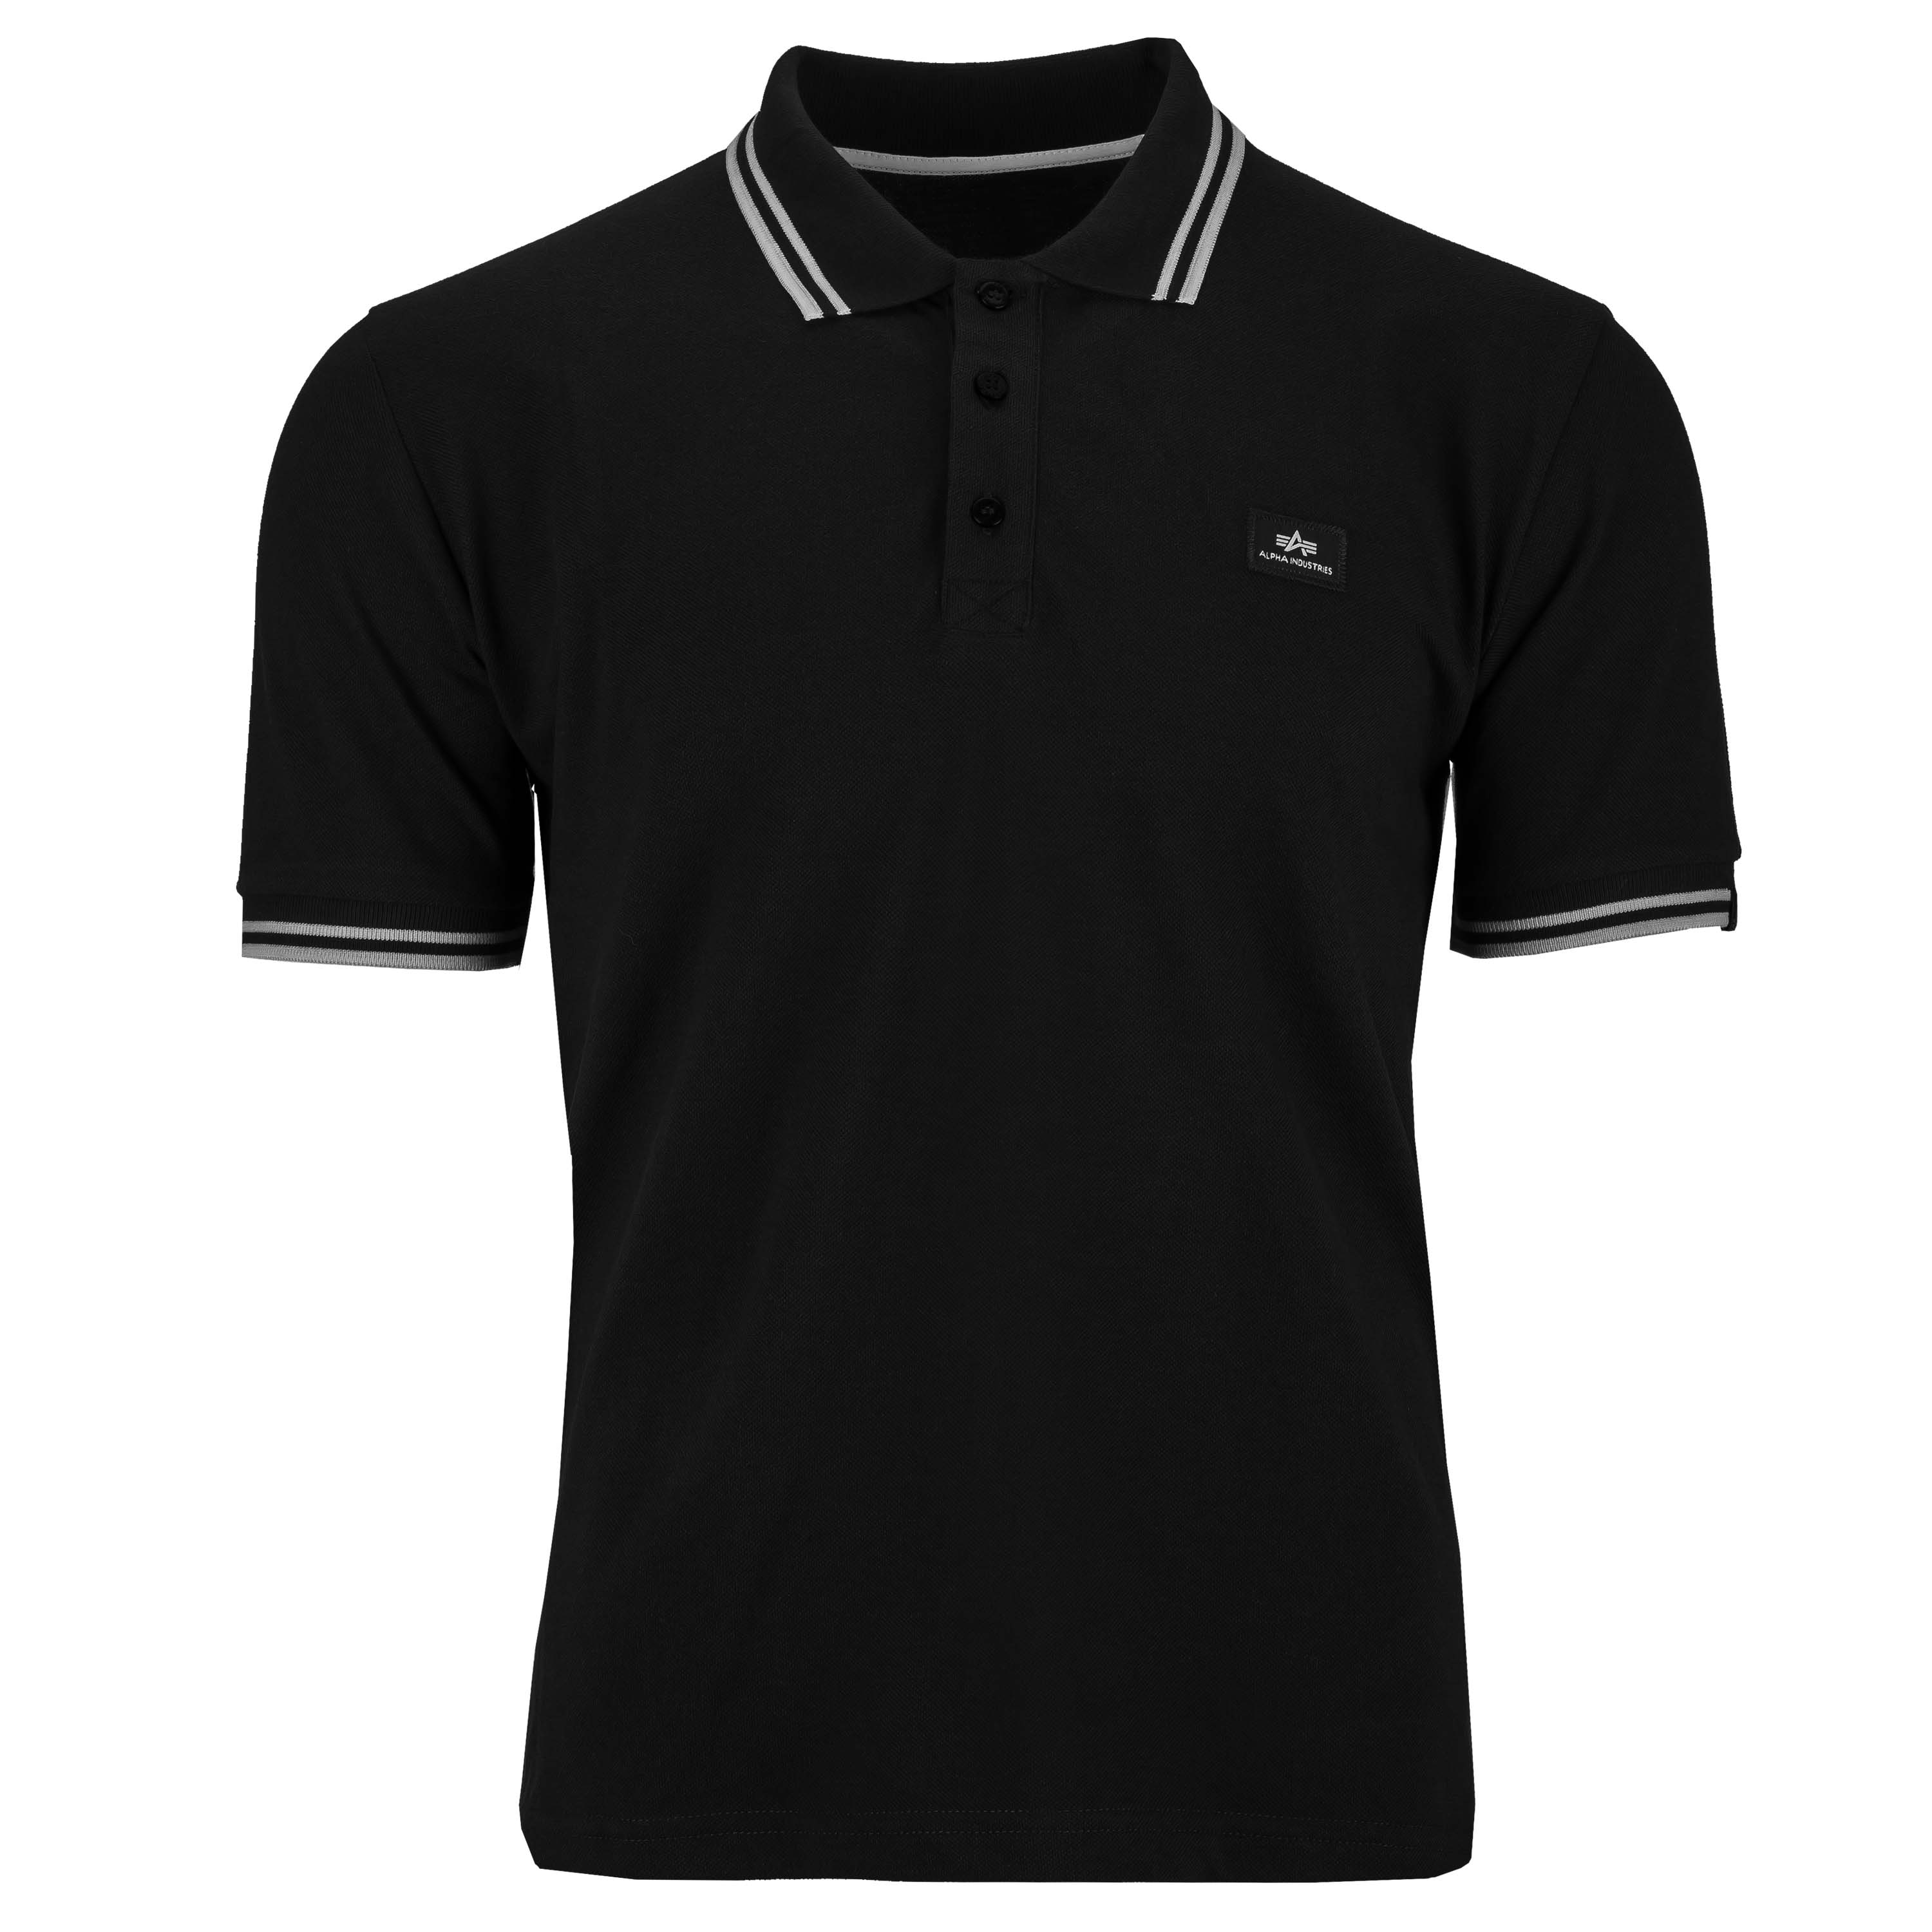 Twin black/wh Industries Polo the Alpha Shirt II Stripe Purchase